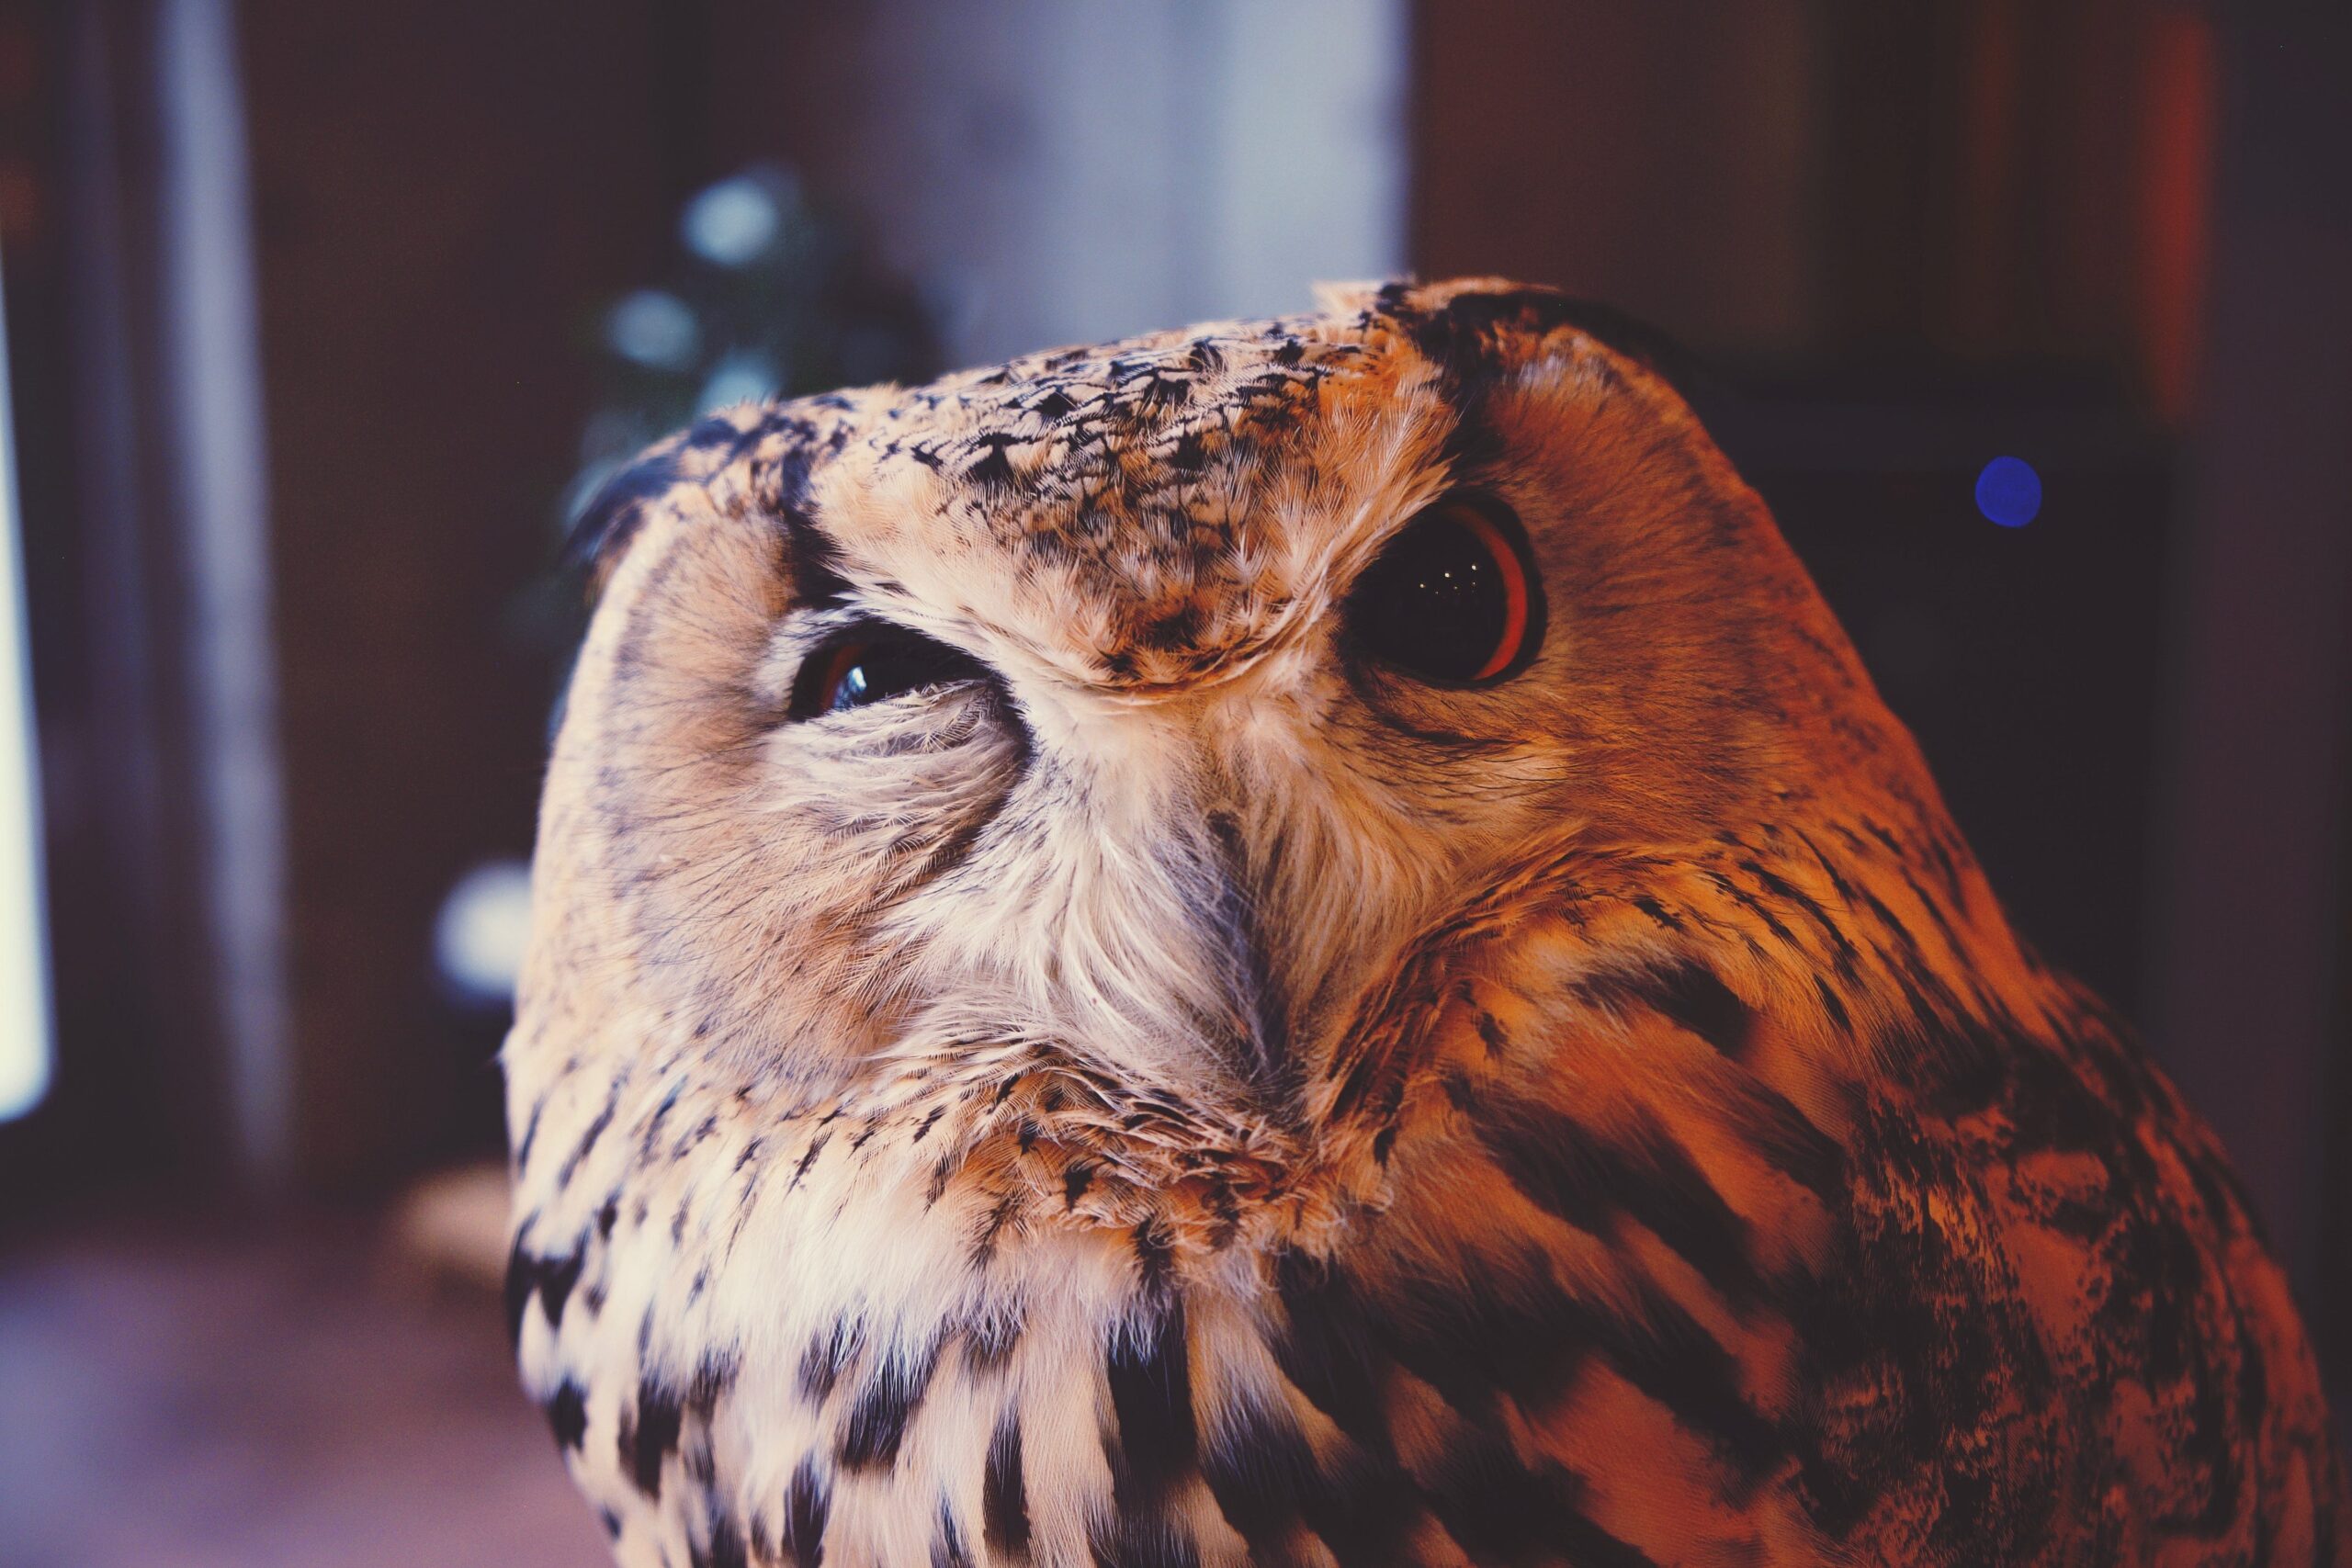 An image of a curios owl for the blog - How much is LinkedIn Recruiter?